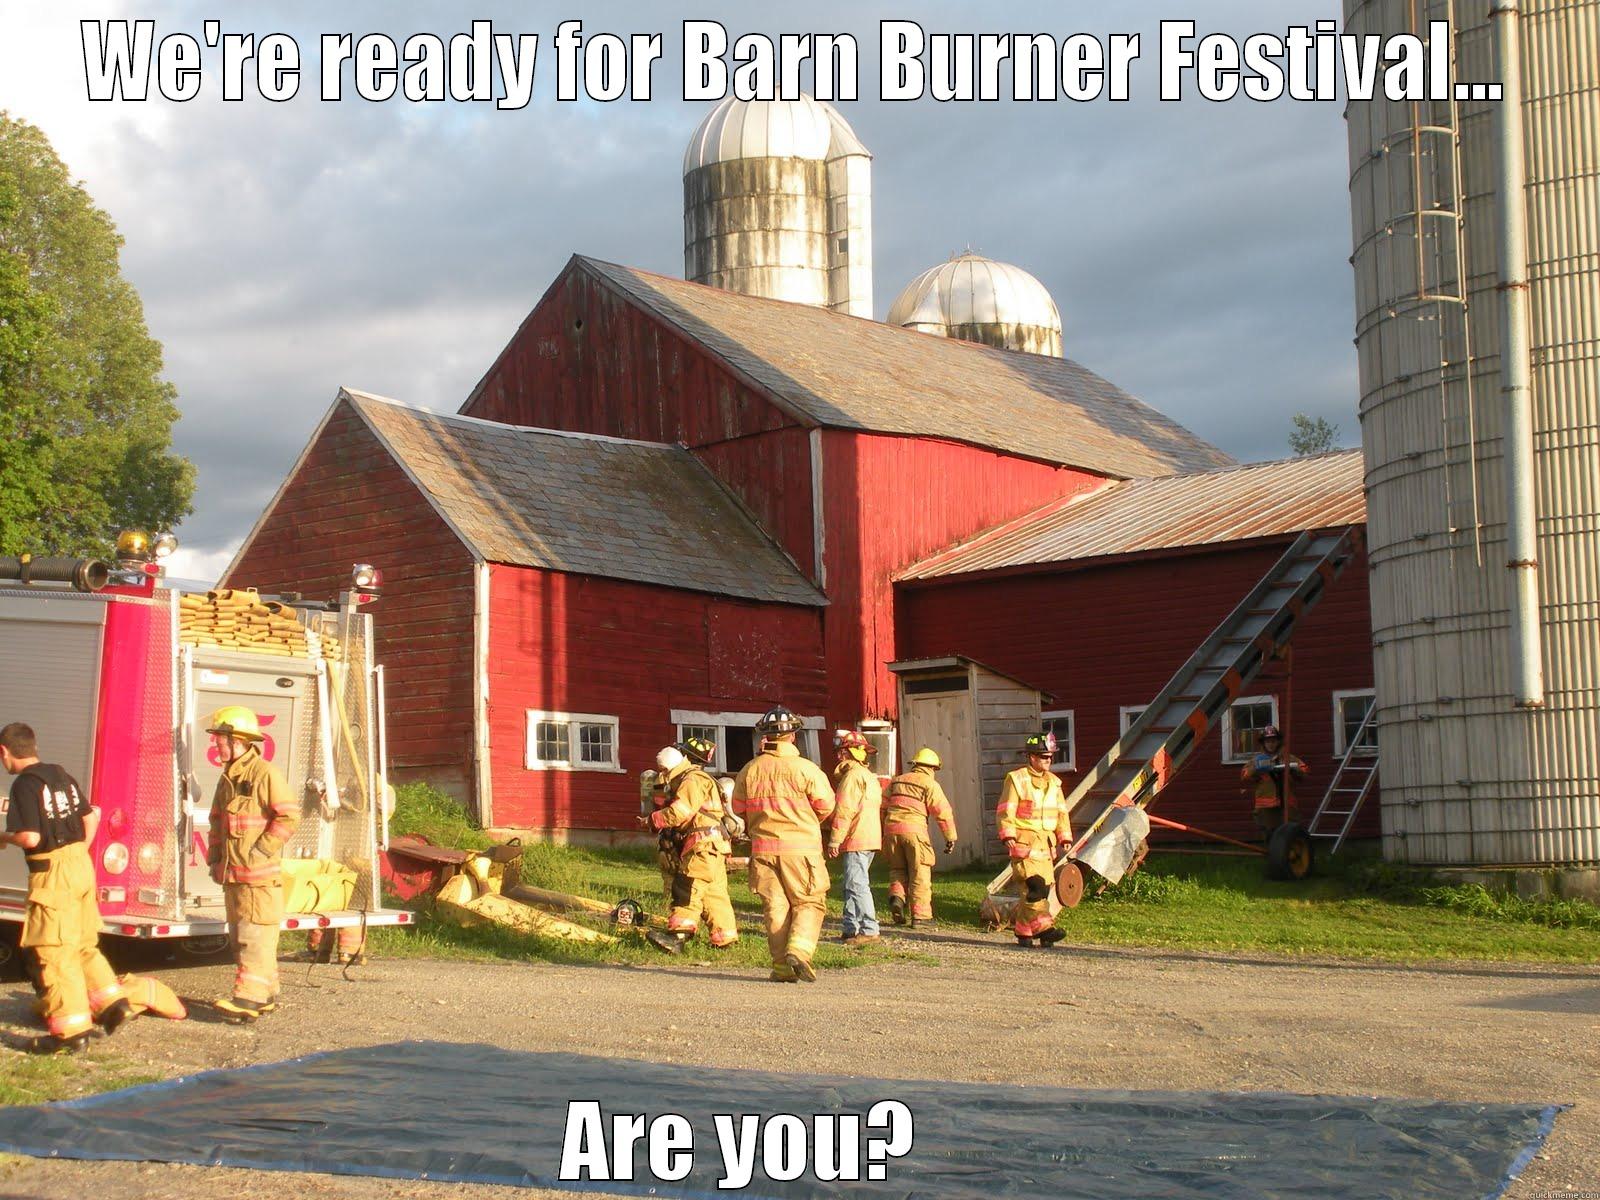 WE'RE READY FOR BARN BURNER FESTIVAL... ARE YOU?       Misc